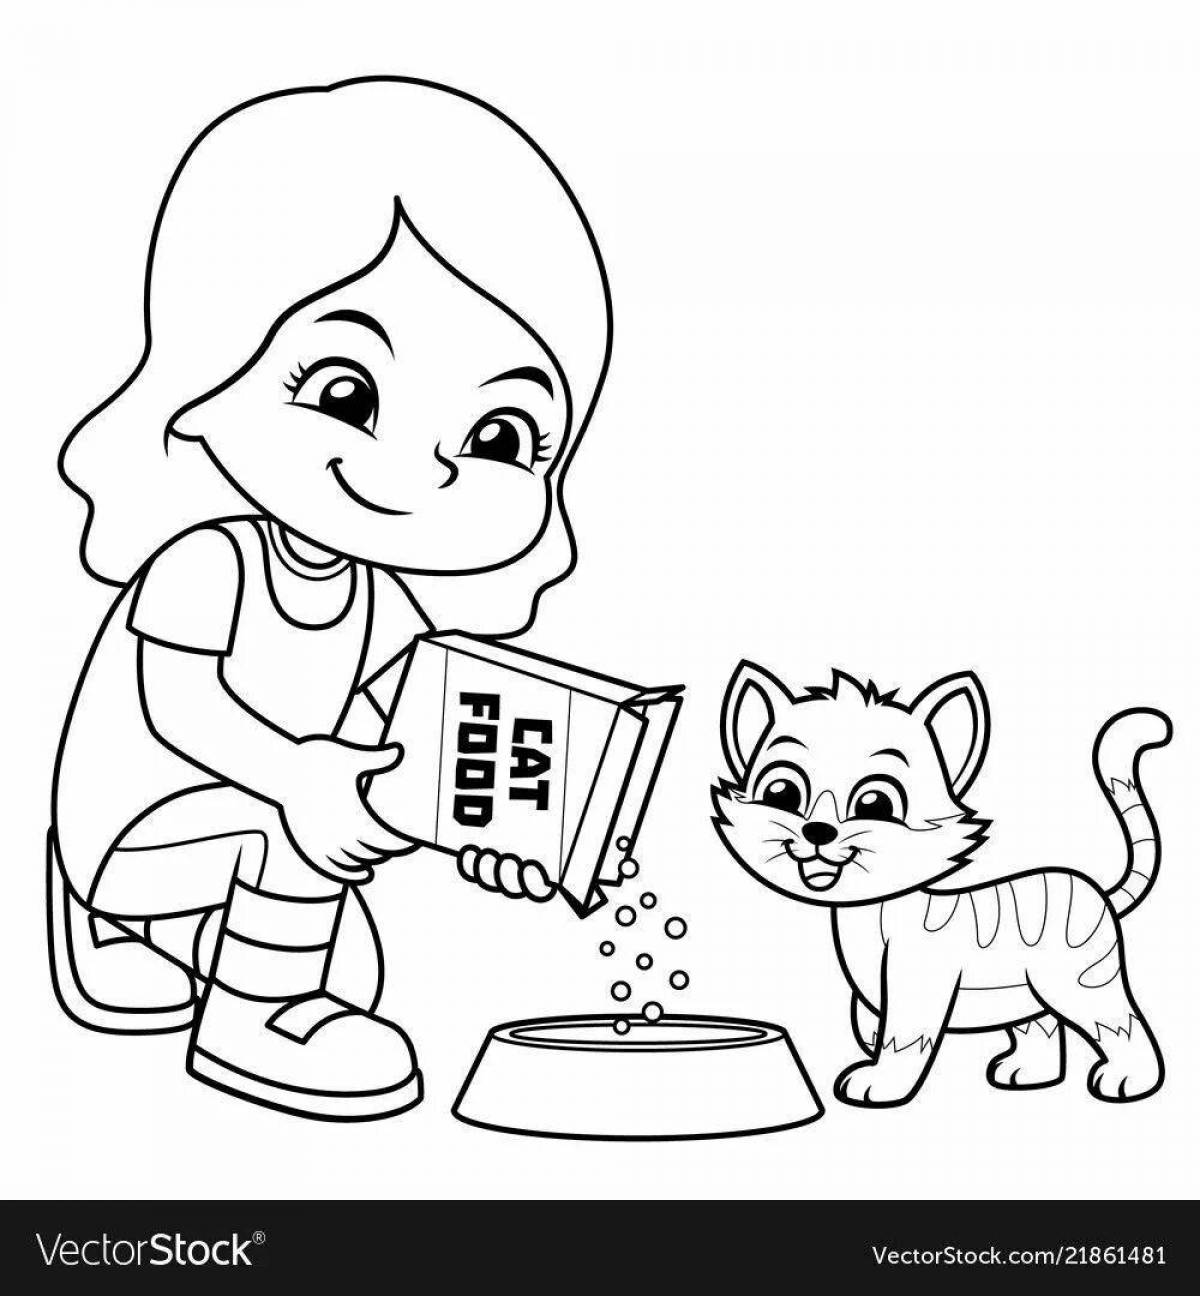 Fun mysyk coloring book for kids